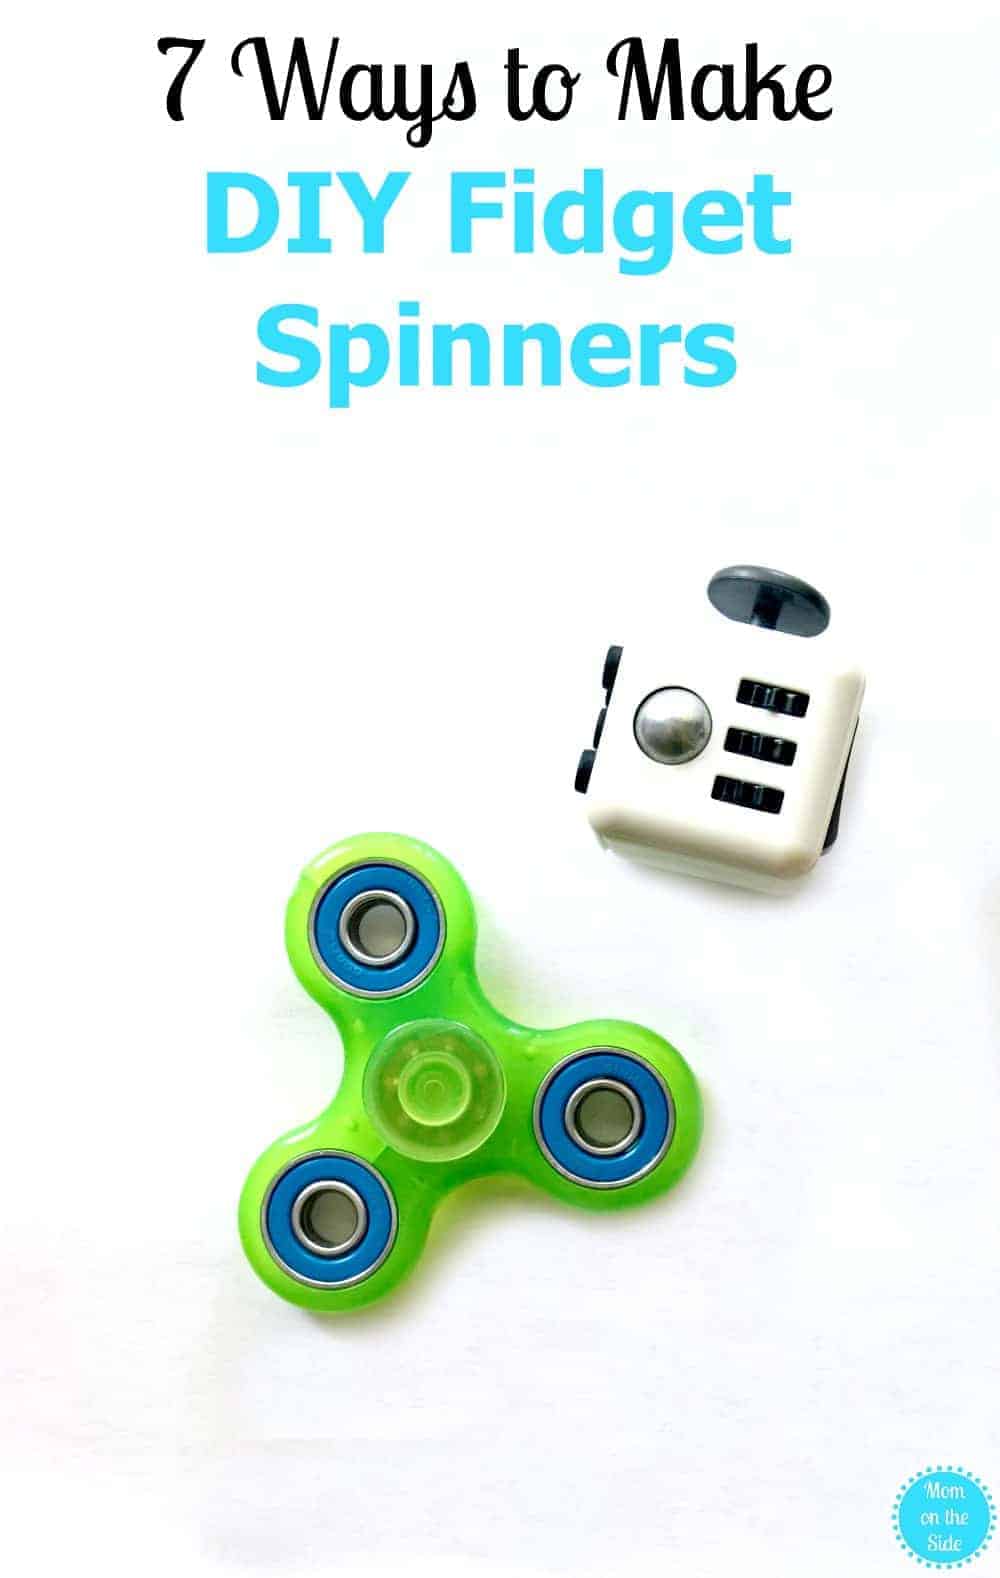 7 Ways to Make DIY Fidget Spinners by Mom on the SIde